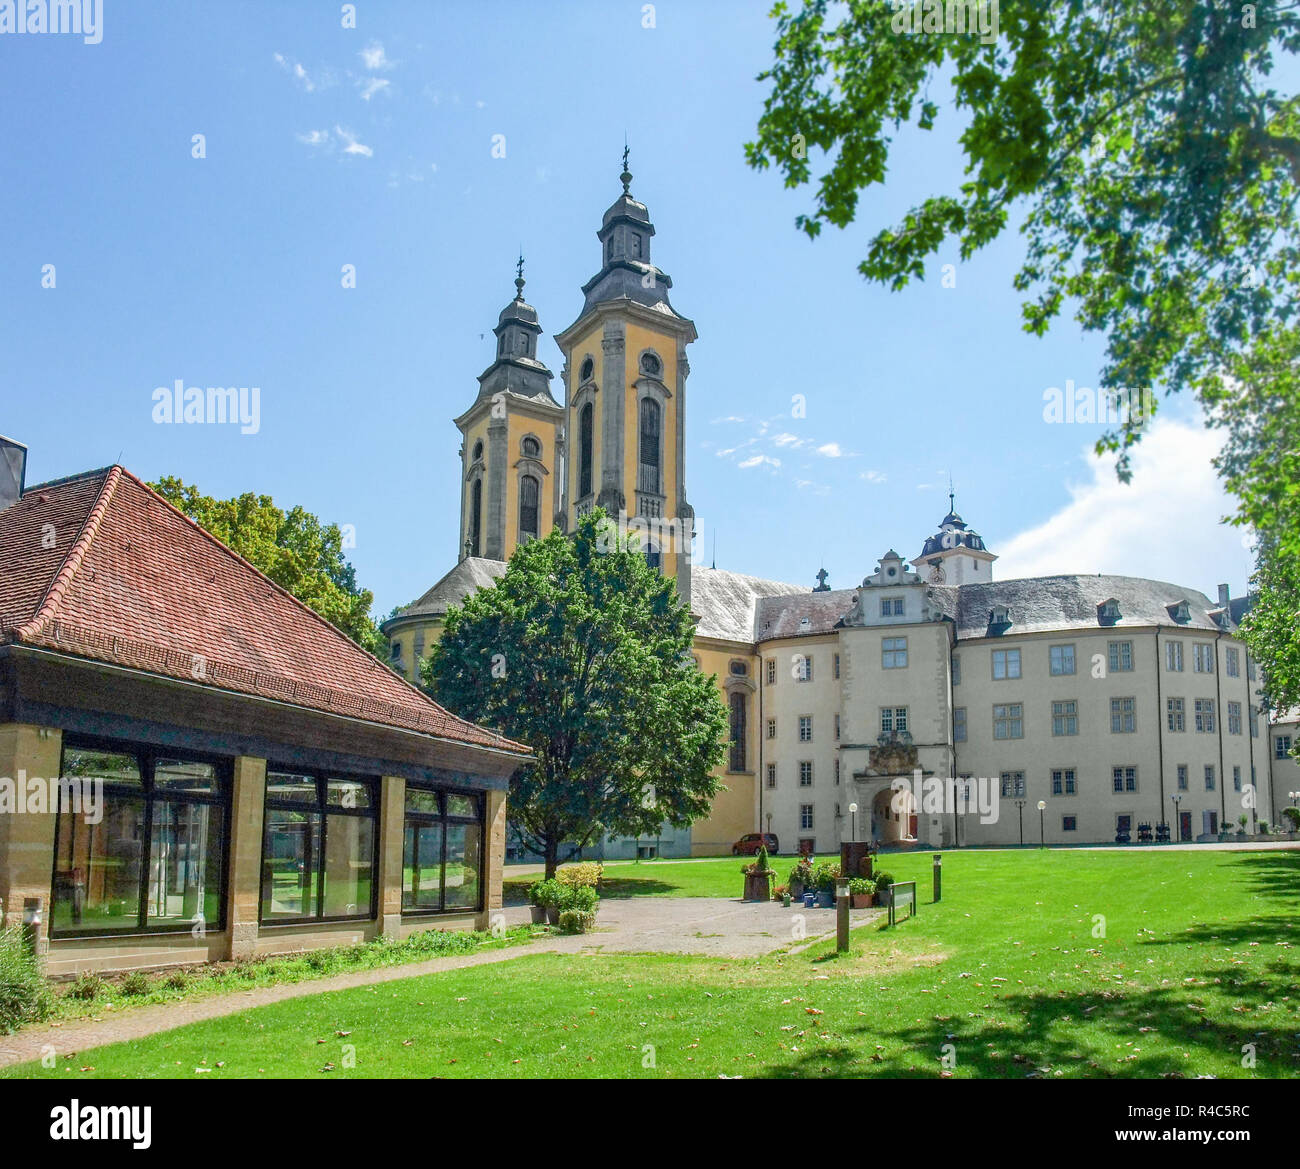 castle of the teutonic order in bad mergentheim Stock Photo